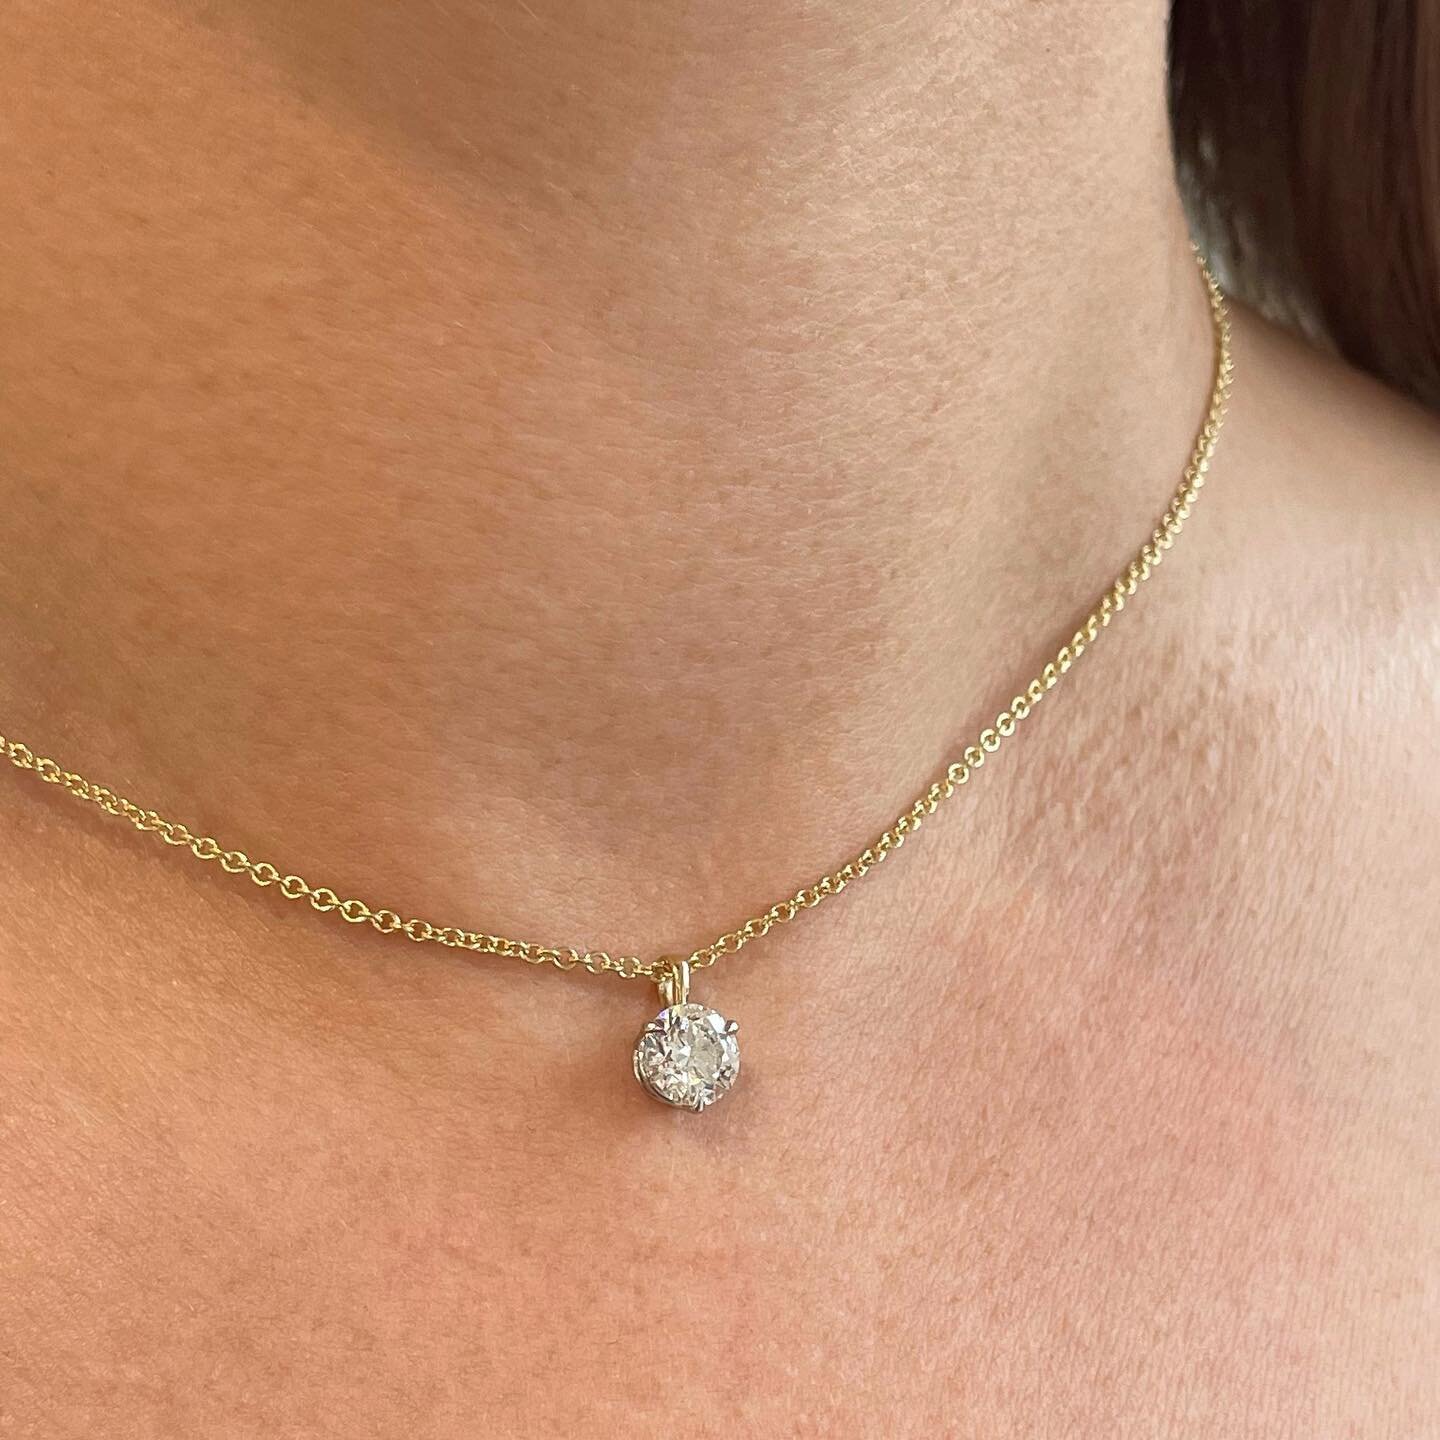 Classic &amp; Timeless - Yes! Beautiful custom made 1 carat diamond pendant. (This was just finished as a custom order - let us know what we can make for you!)